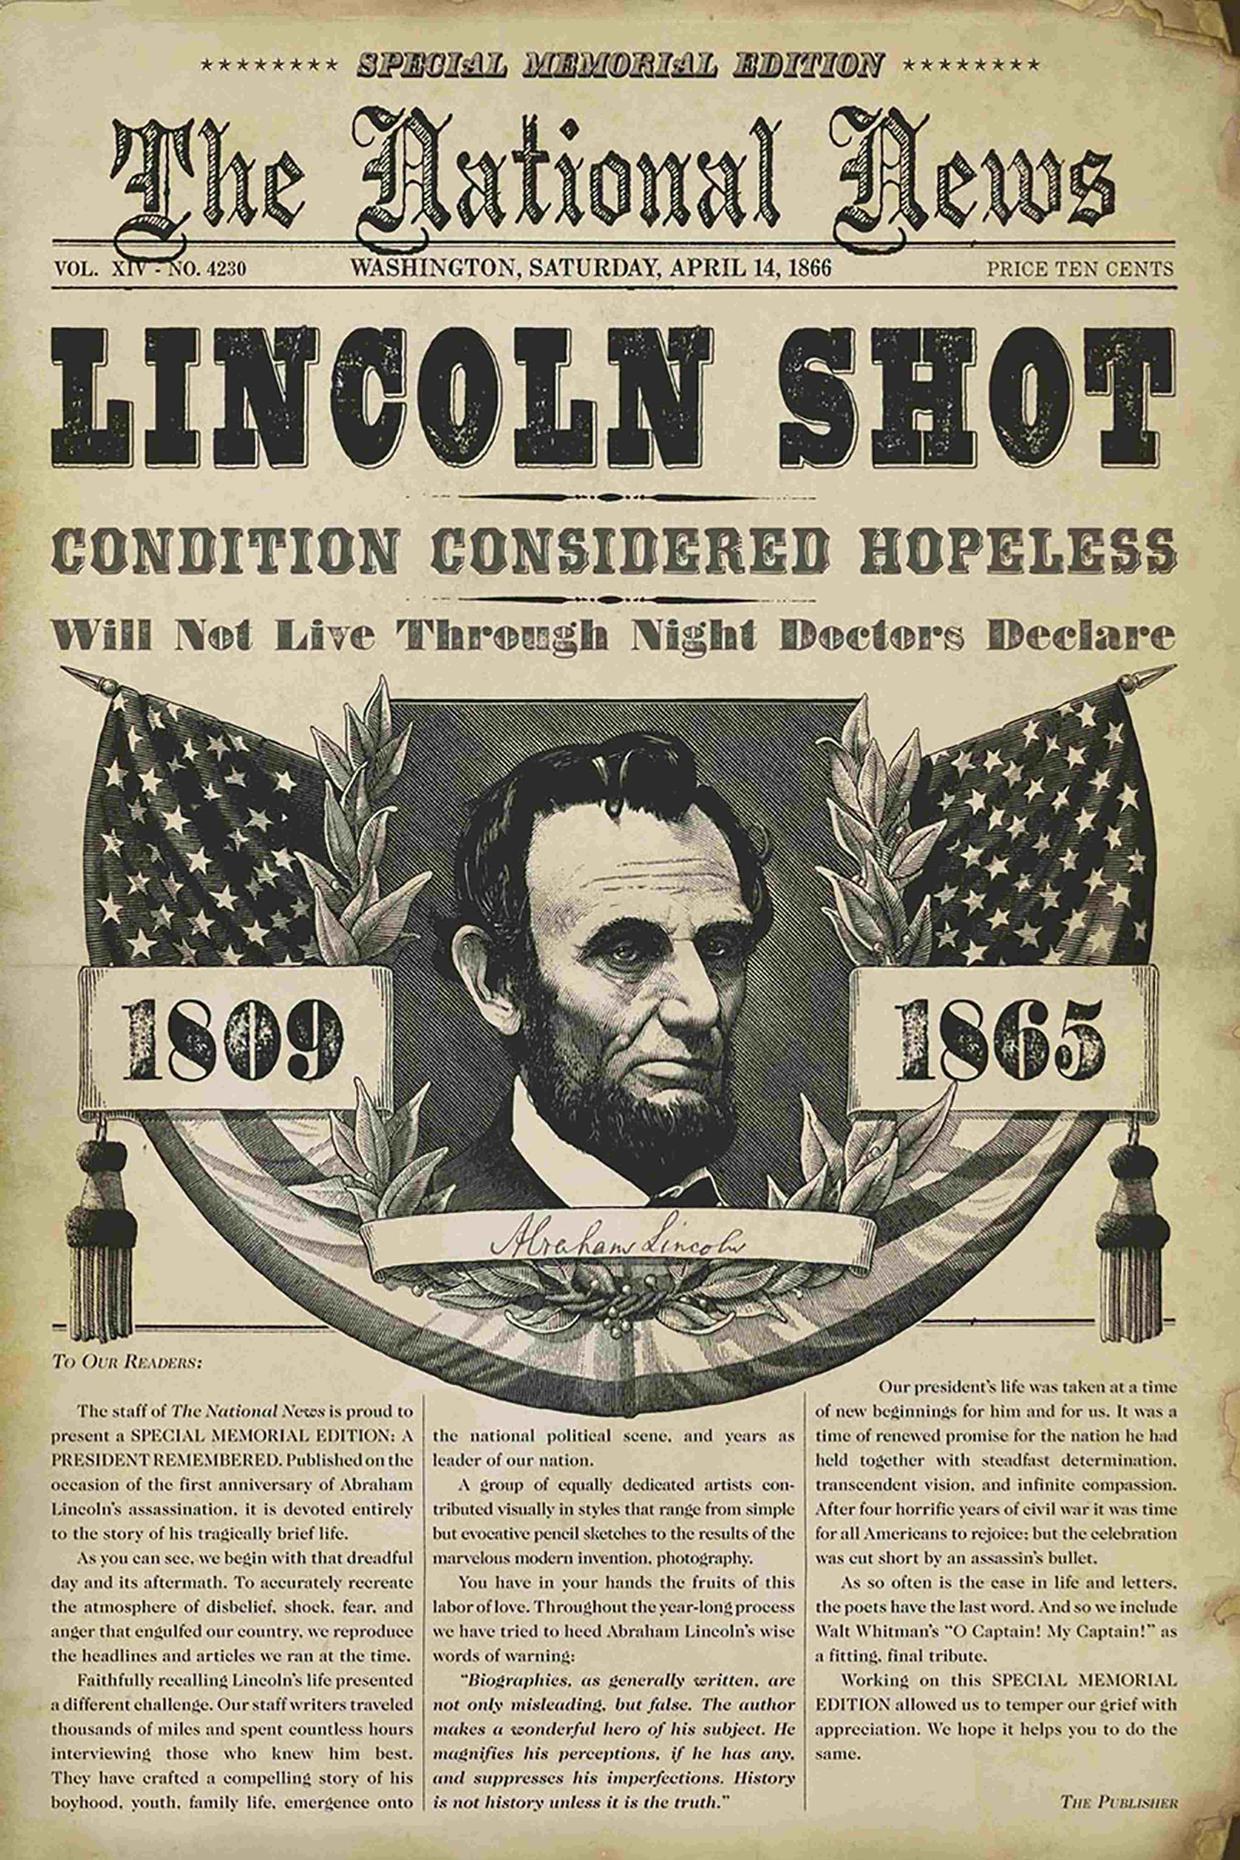 Abraham Lincoln's assassination 150th anniversary of national tragedy